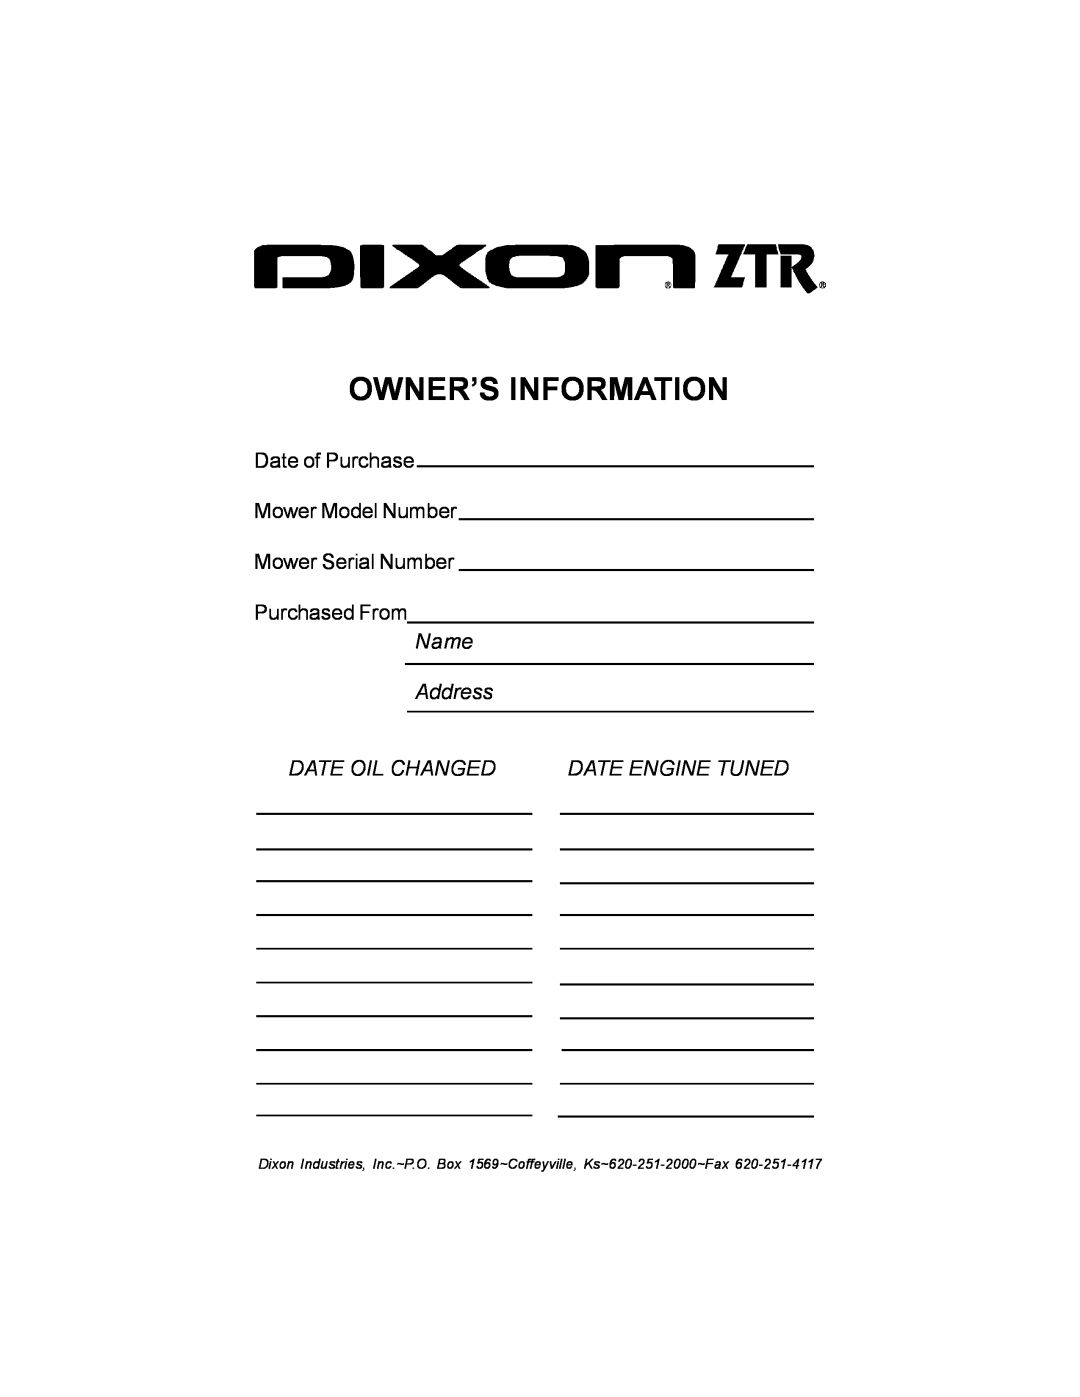 Dixon 12881-106 manual Owner’S Information, Date of Purchase Mower Model Number Mower Serial Number, Purchased From 